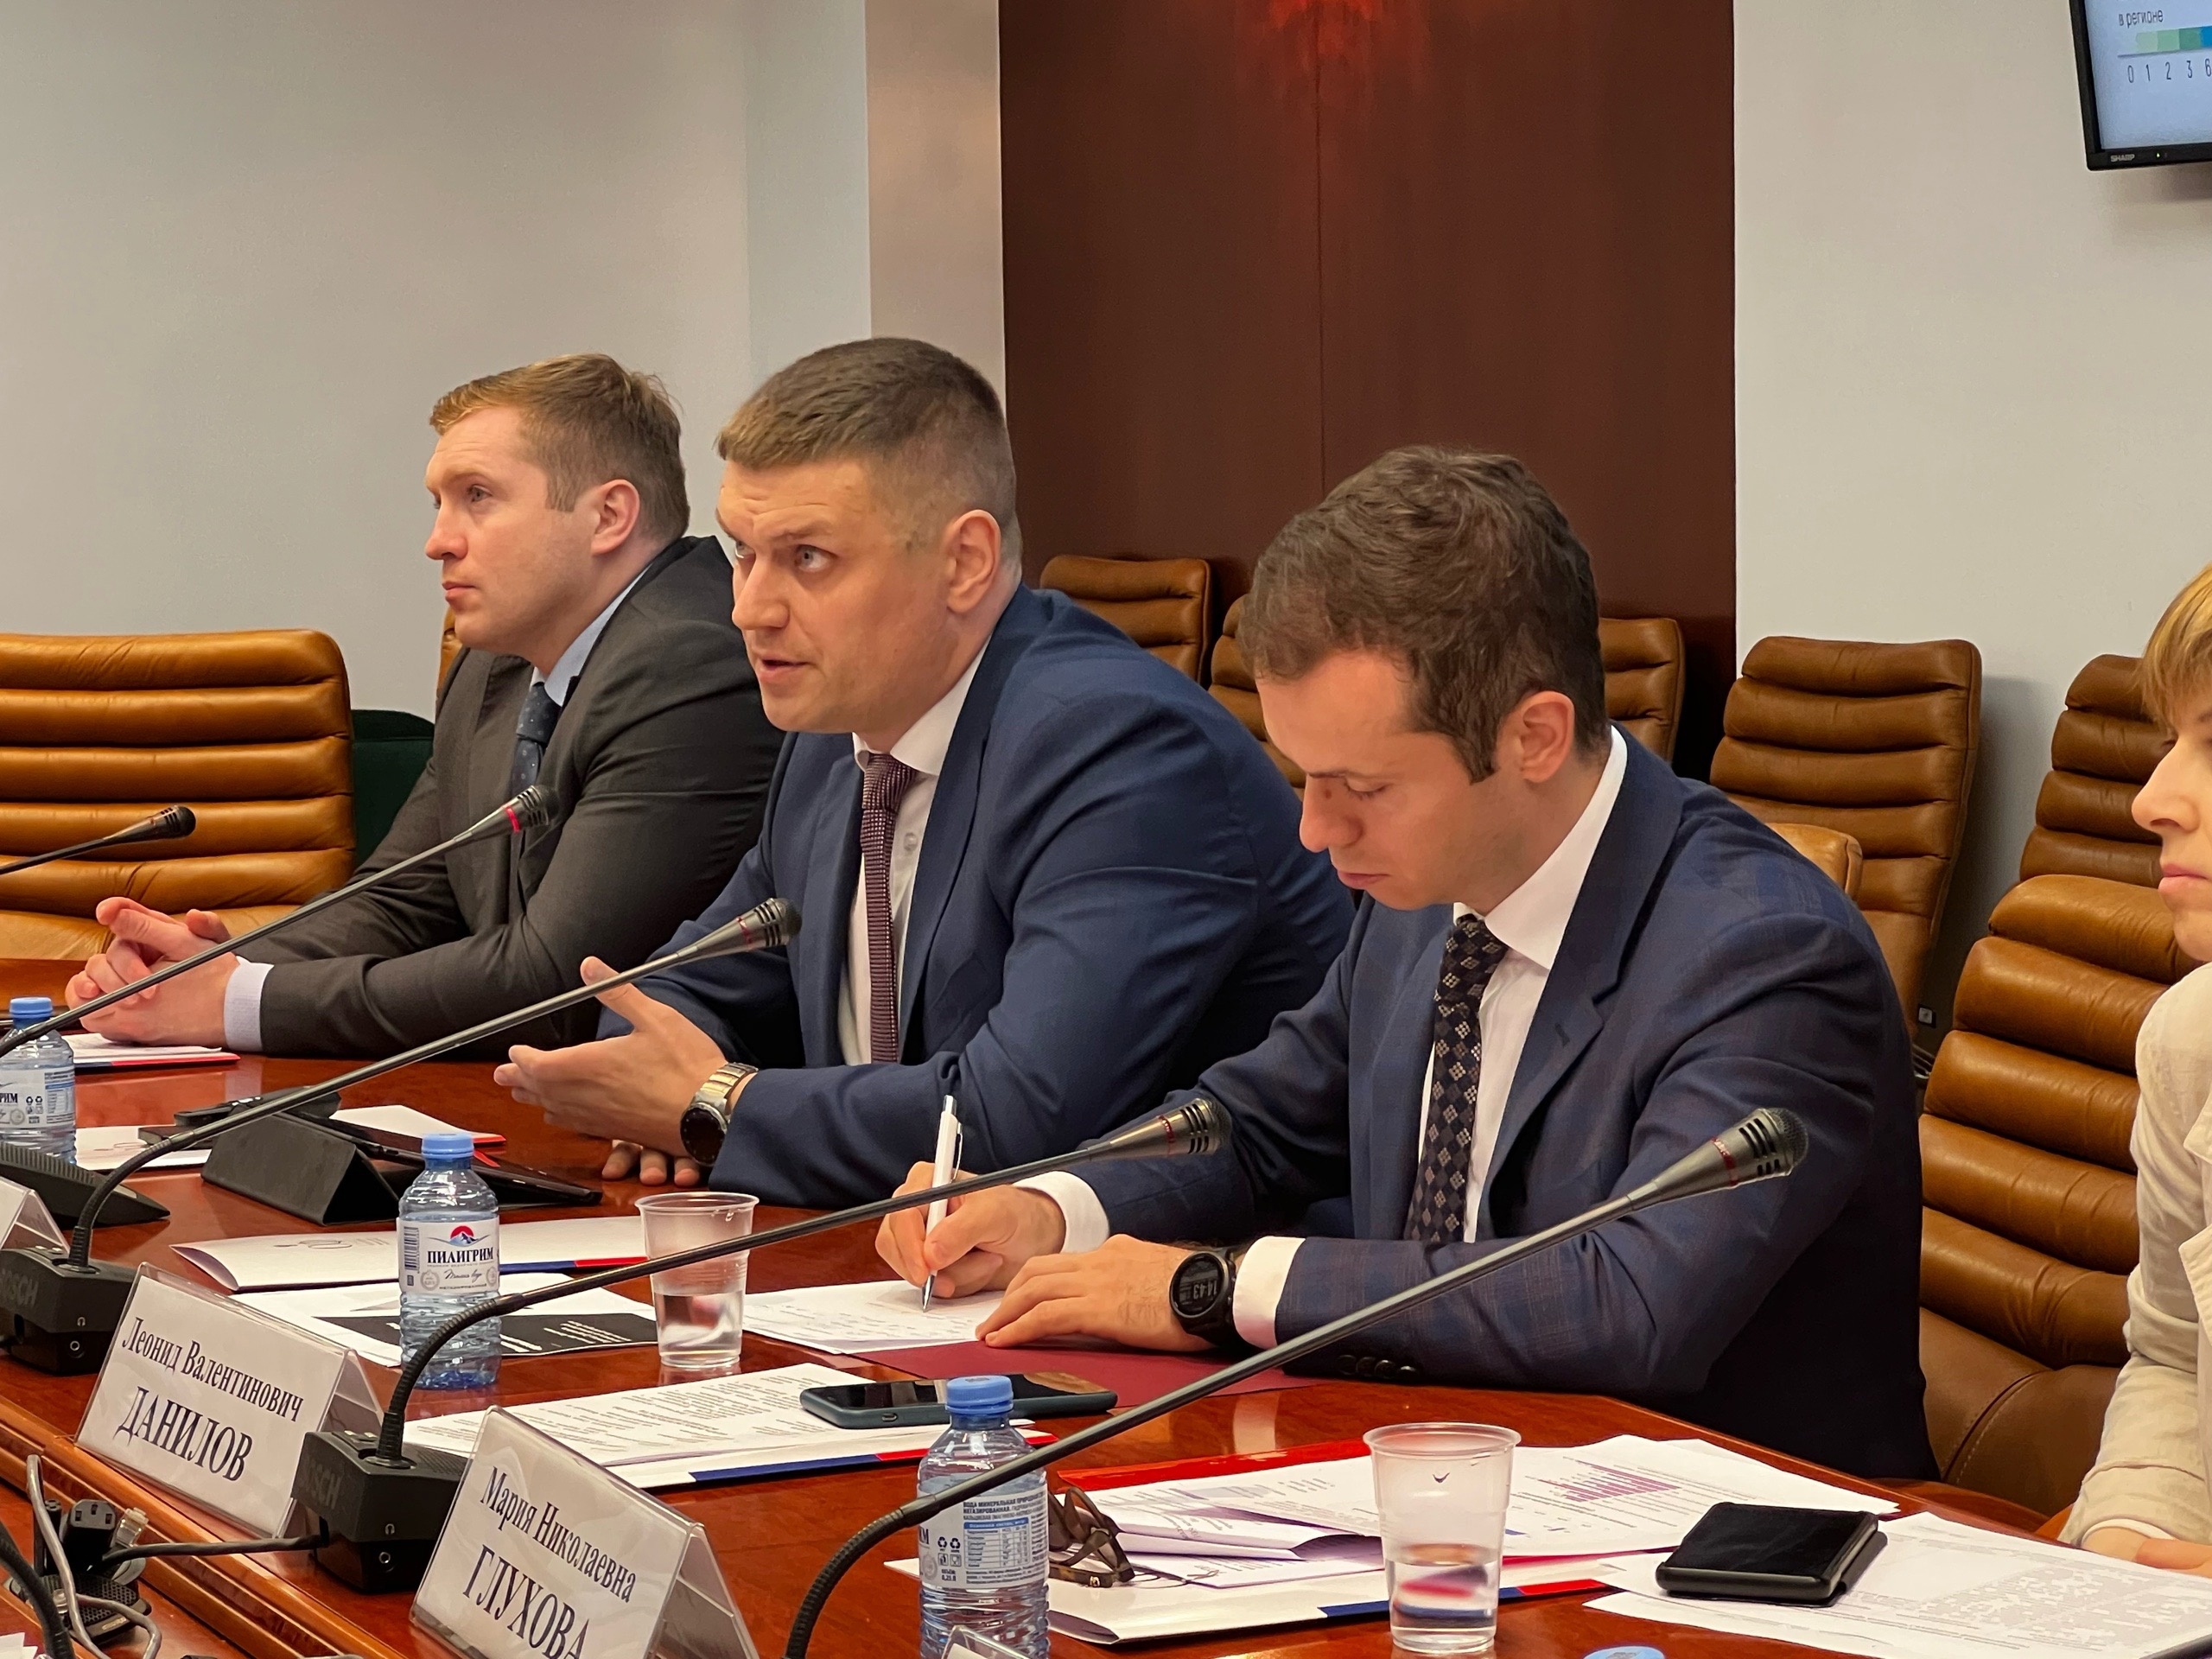 THE FEDERATION COUNCIL DISCUSSED THE DEVELOPMENT OF INDUSTRIAL CLUSTERS AND THE IMPLEMENTATION OF INDUSTRIAL MORTGAGES